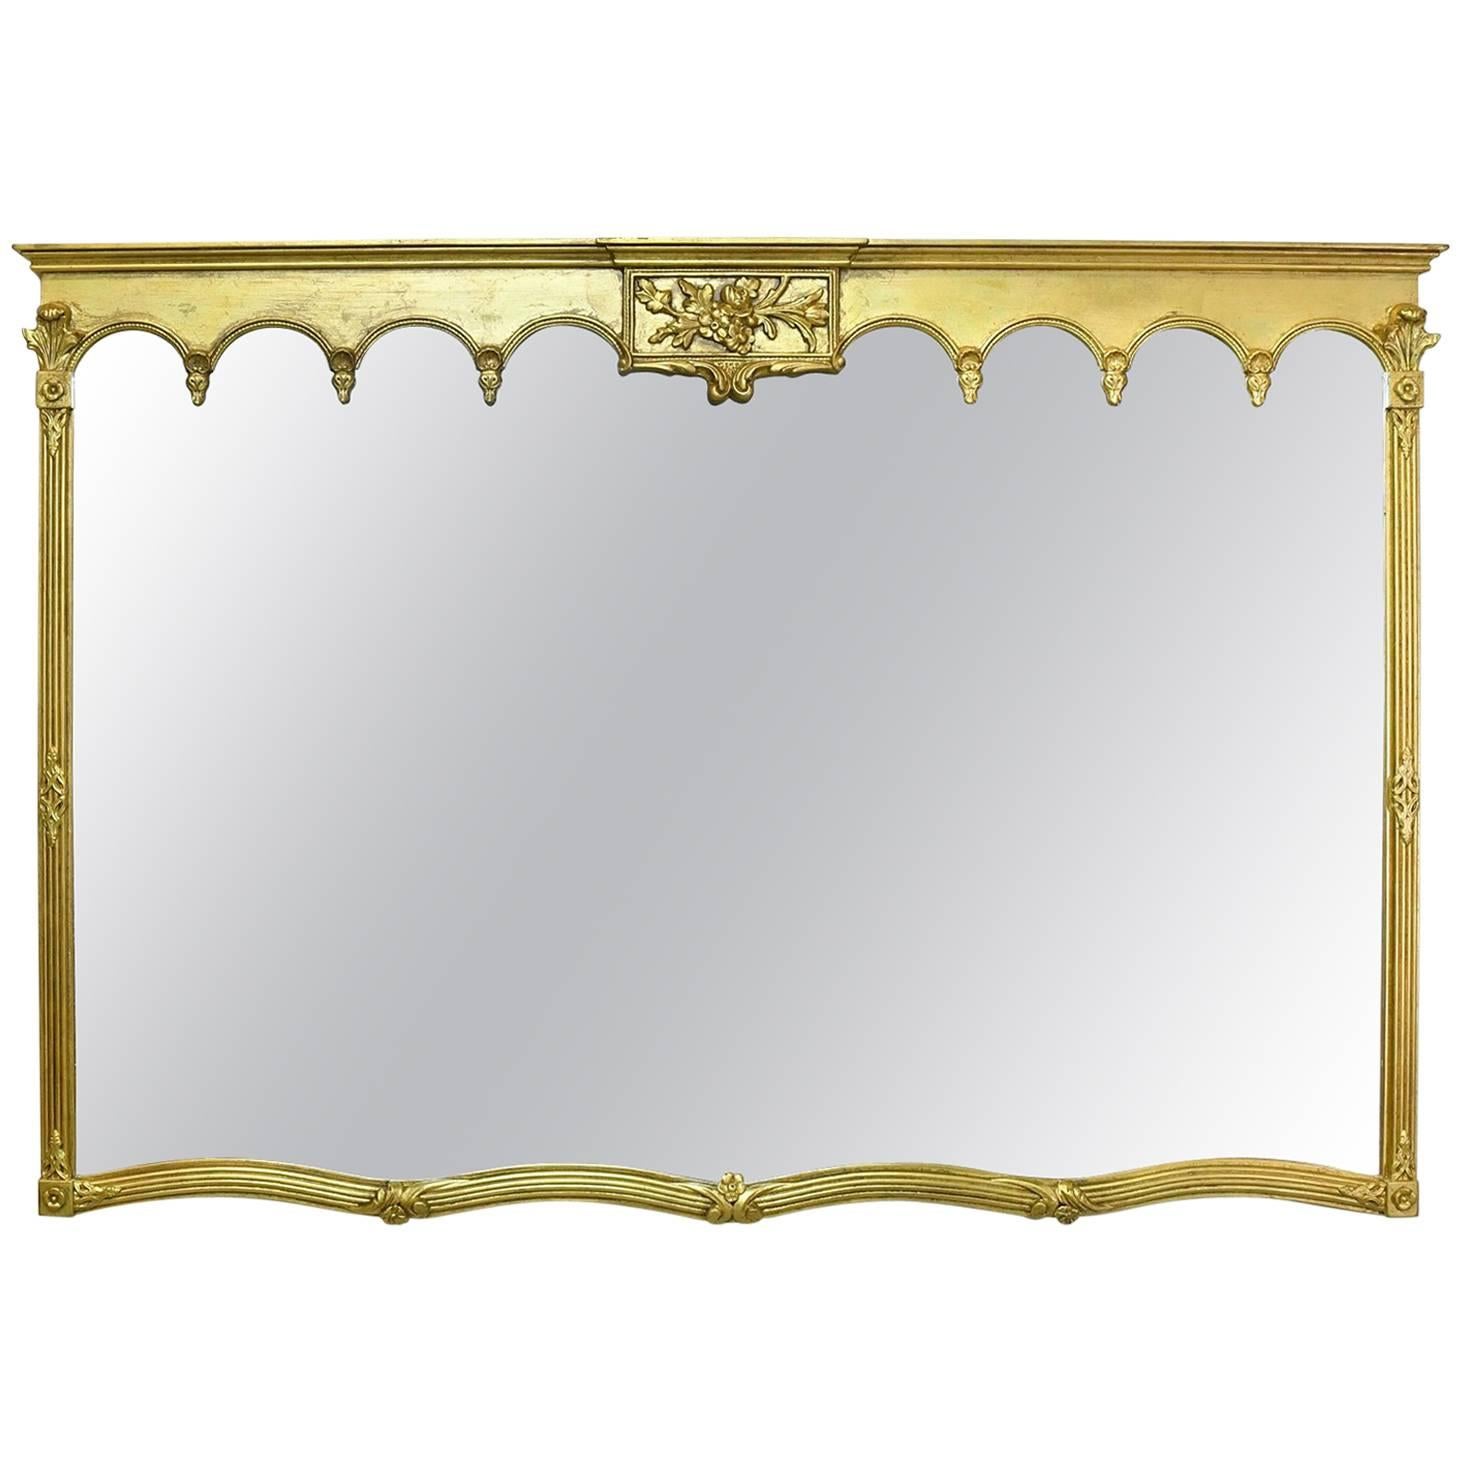 Early 20th Century Large Gilded Mantle Mirror